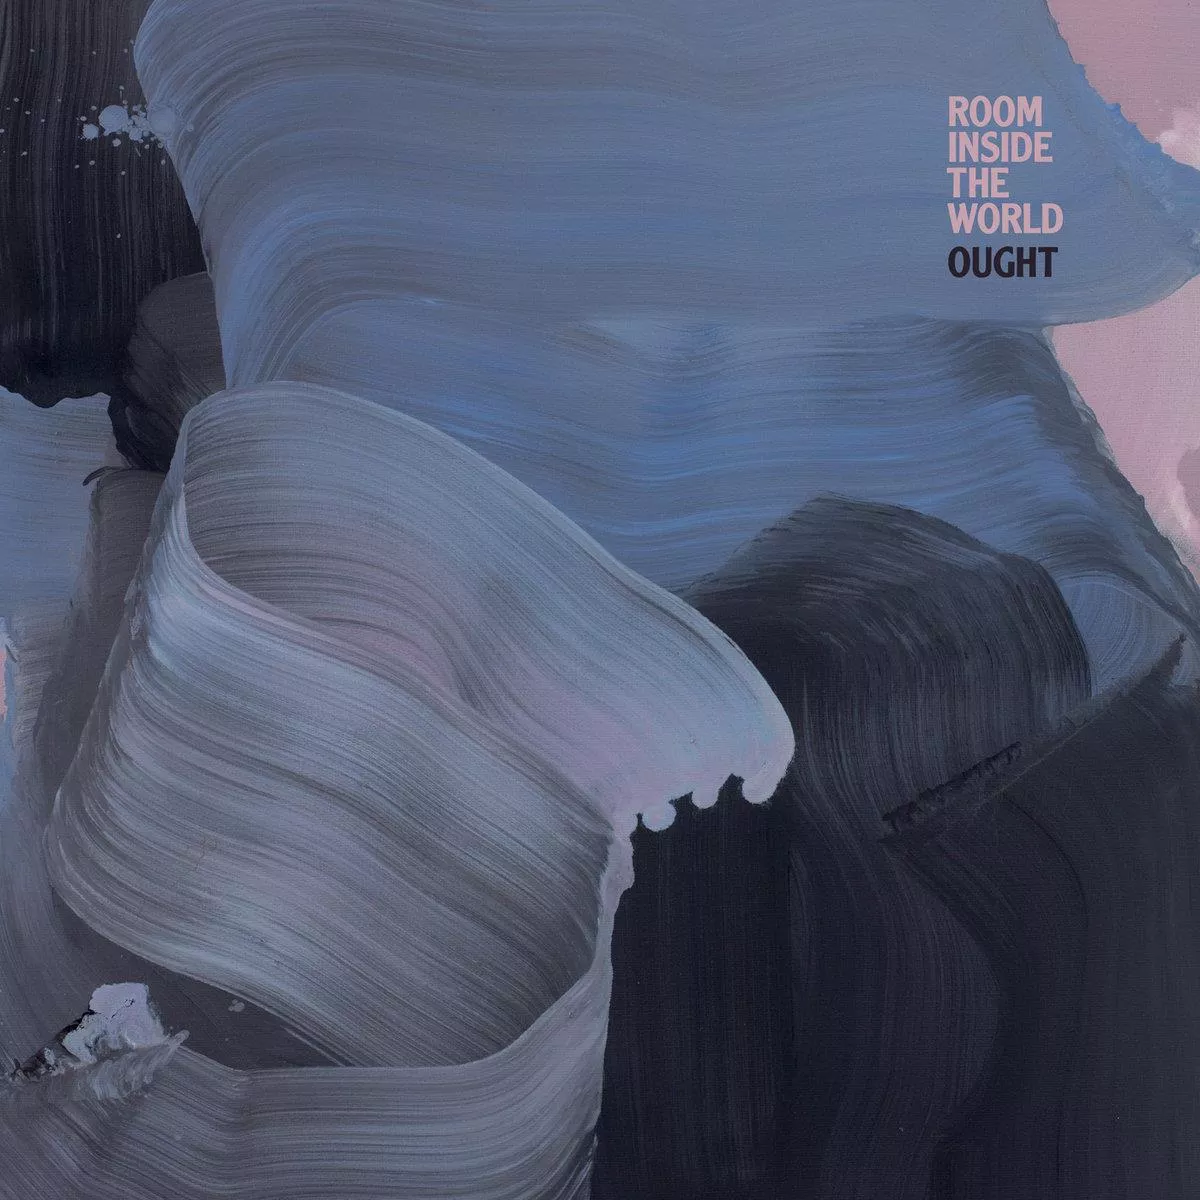 Room Inside The World - Ought